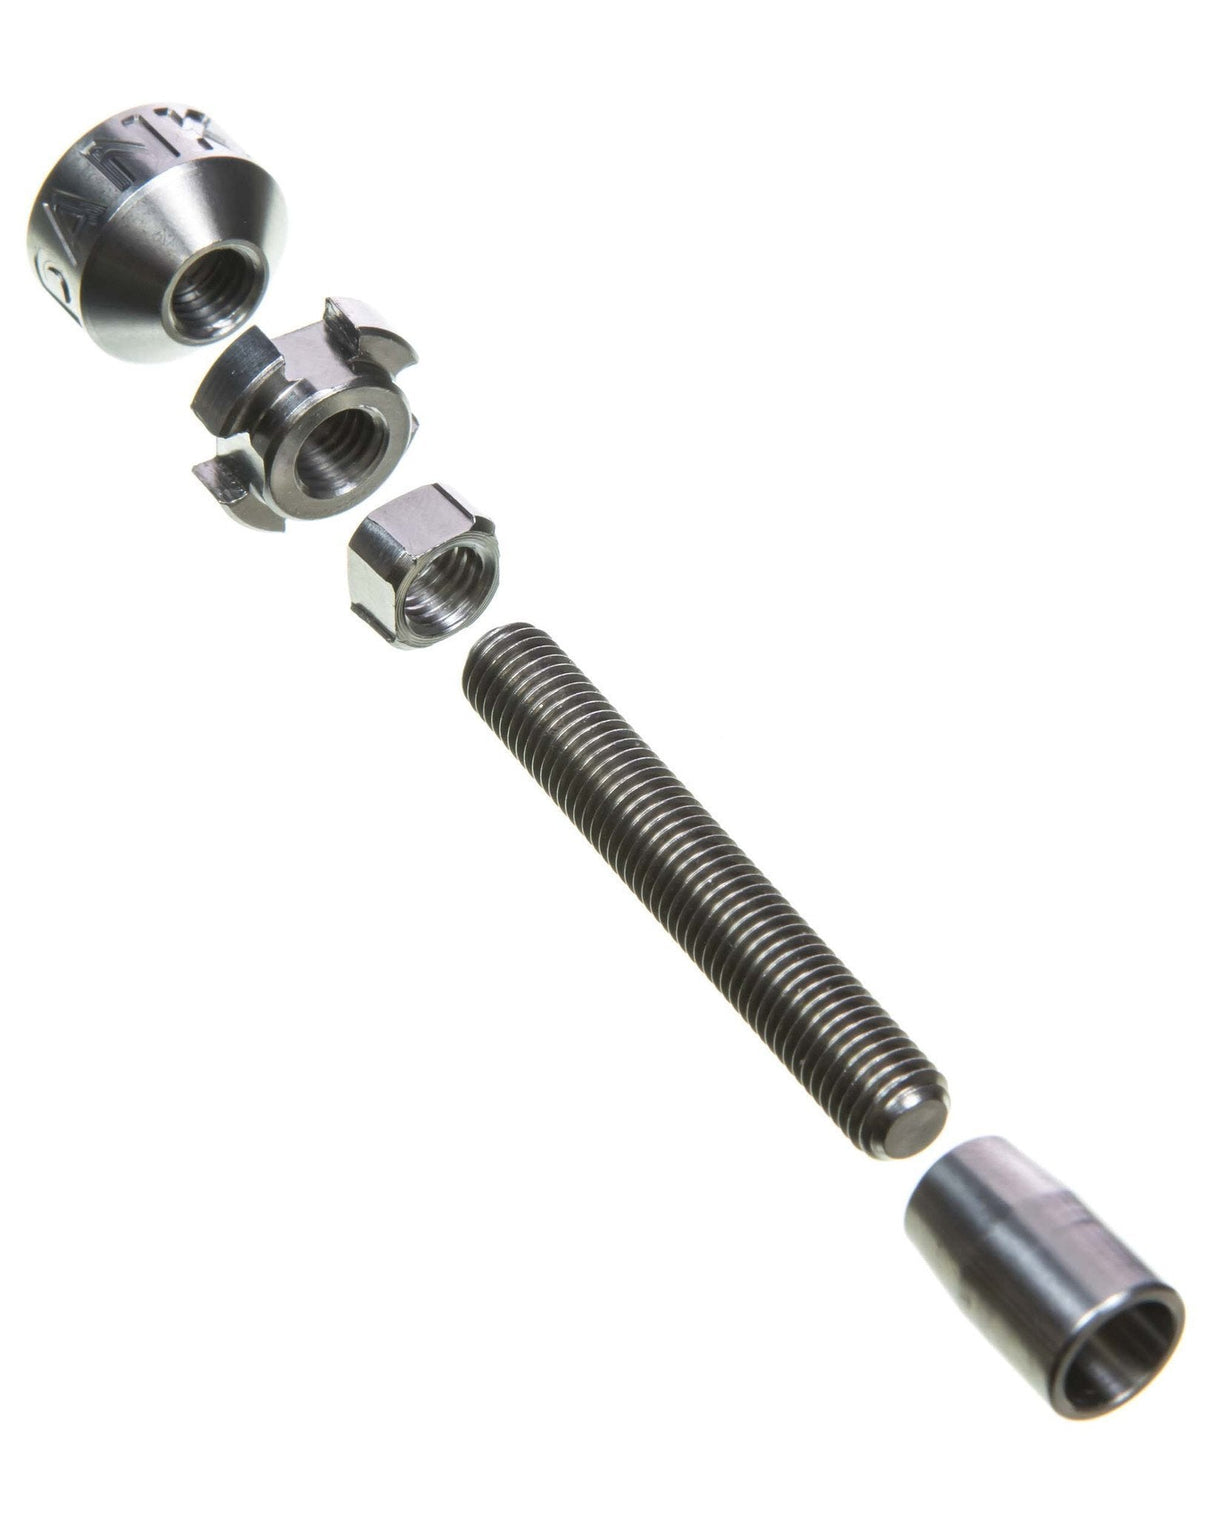 Dank Tools 18mm Adjustable Titanium Nail for Dab Rigs, Disassembled View on White Background